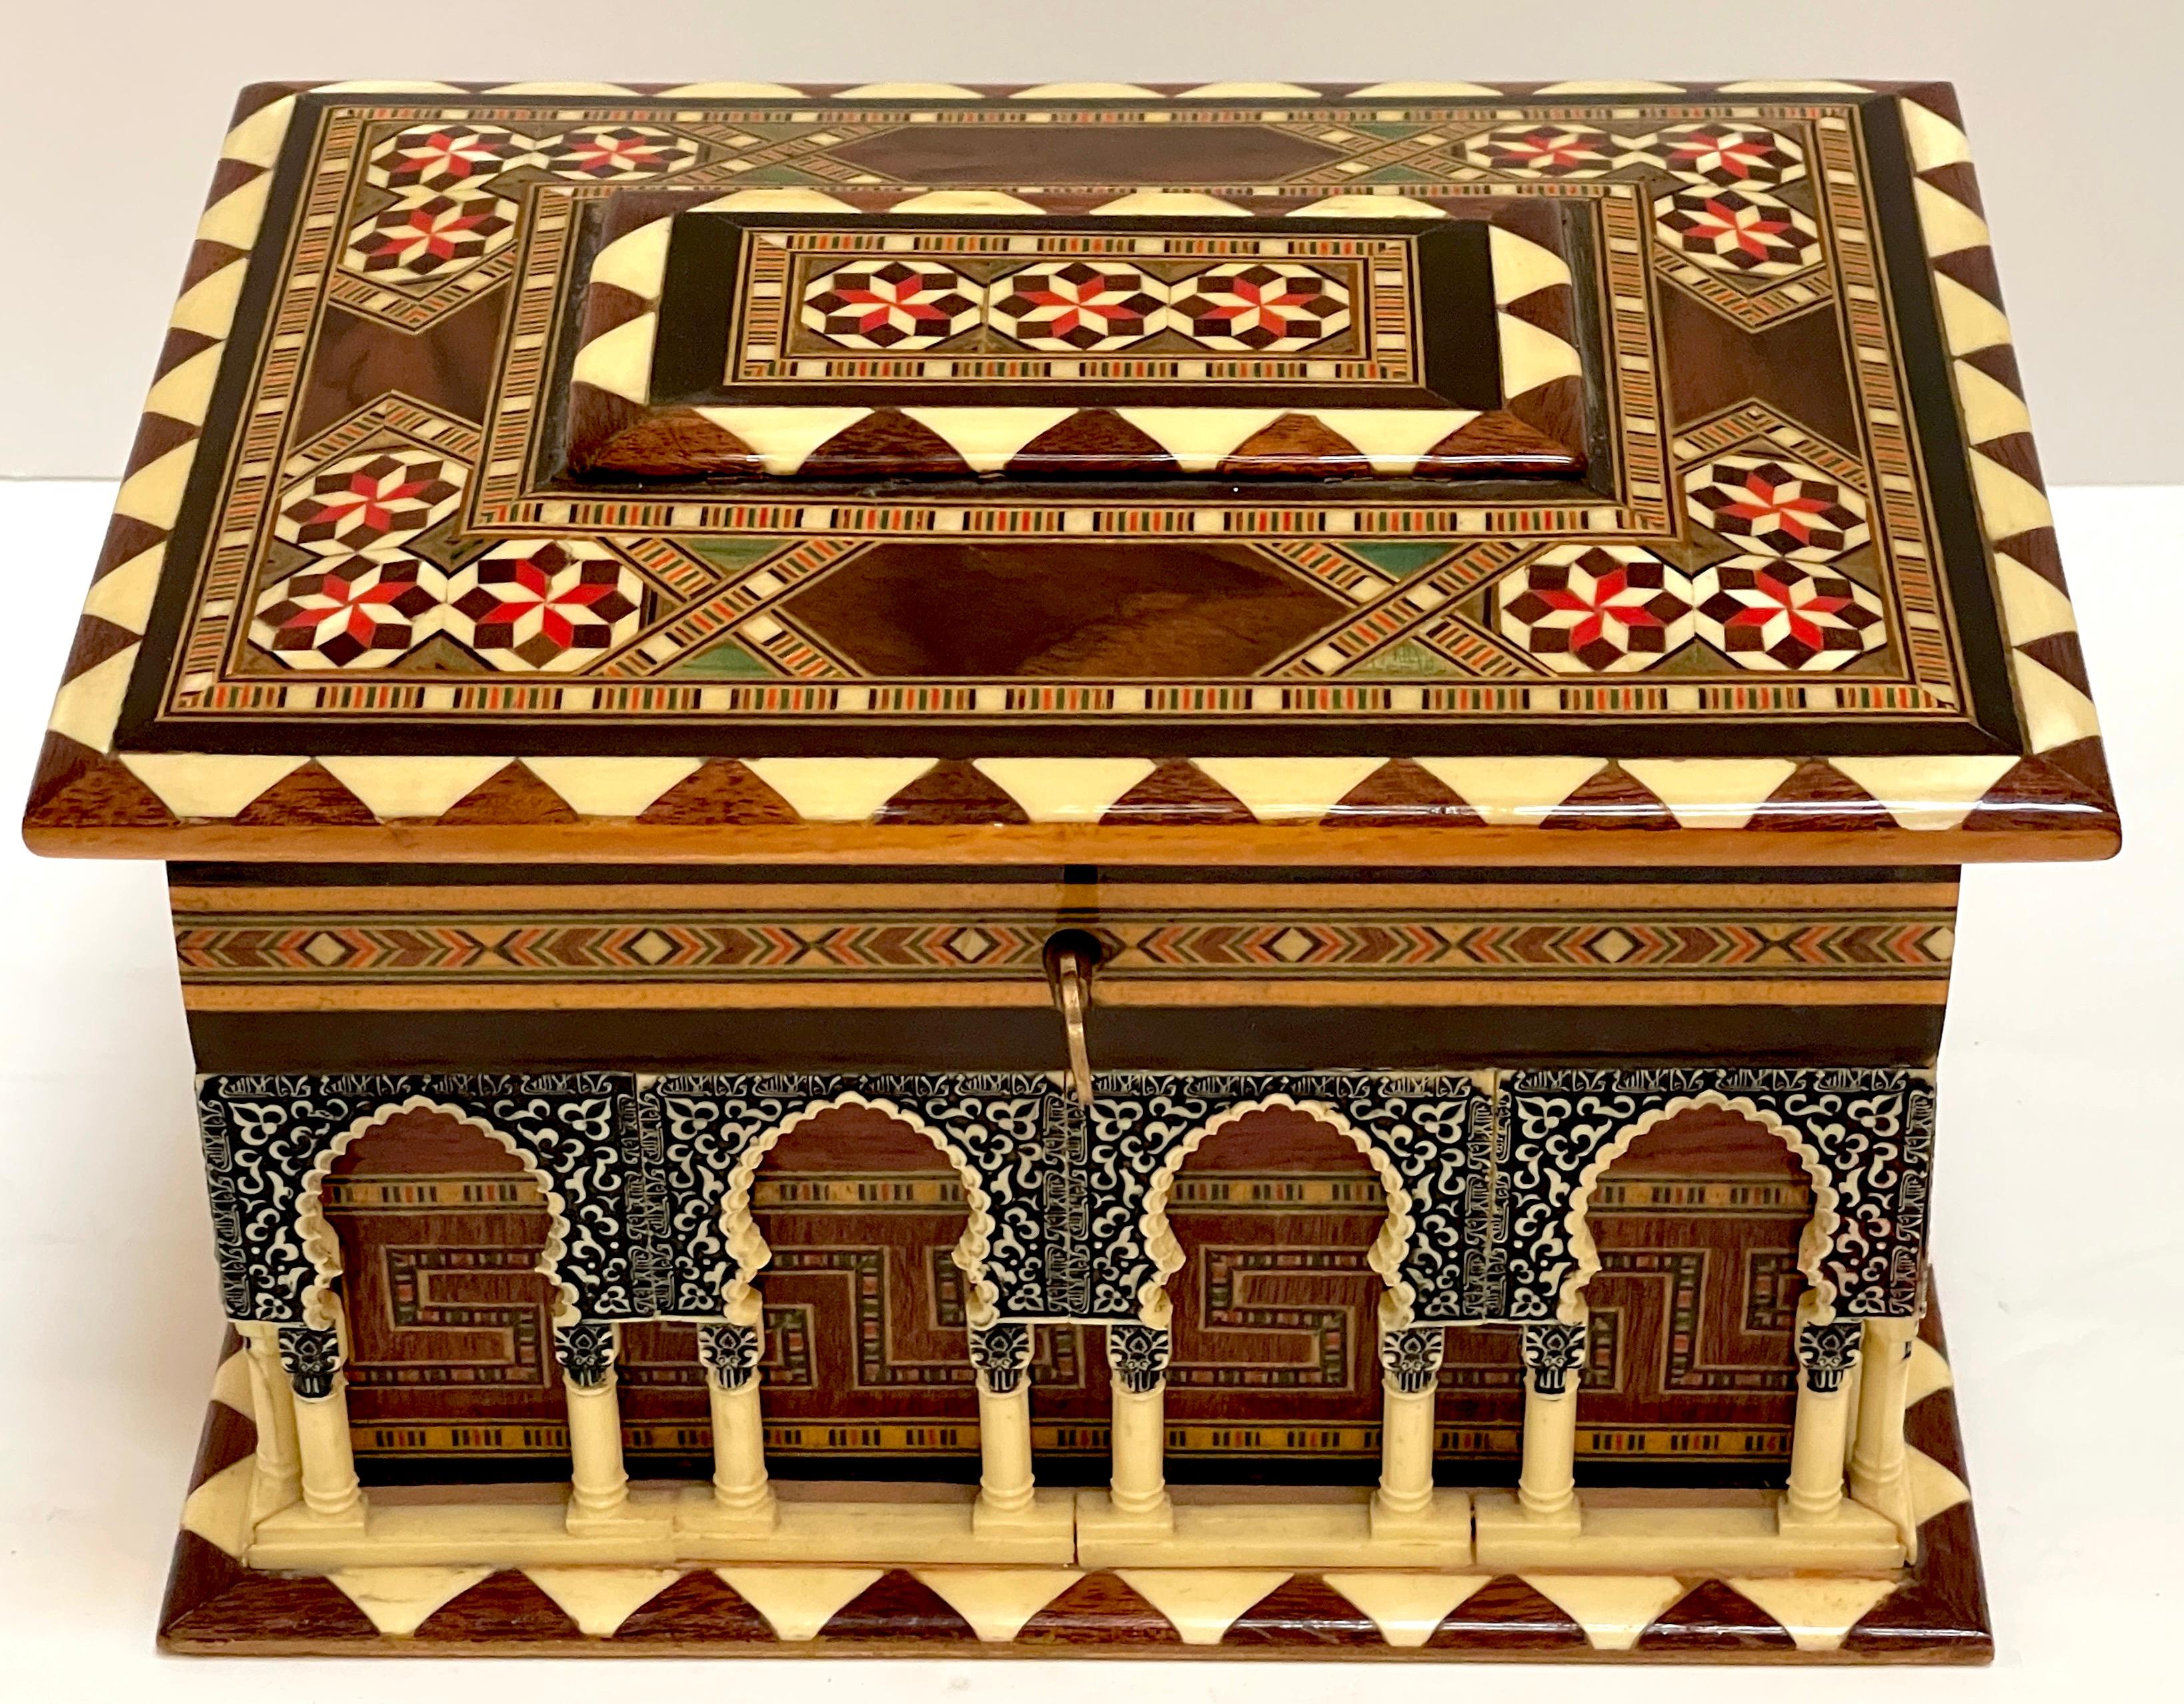 Architectural Model Box of the Alhambra Palace, with Key
Handcrafted in Granada, Spain, Circa 1960s
A stunning architectural model box that showcases the beauty and grandeur of Granada's Alhambra Palace. Handcrafted in Granada, Spain, circa 1960s,